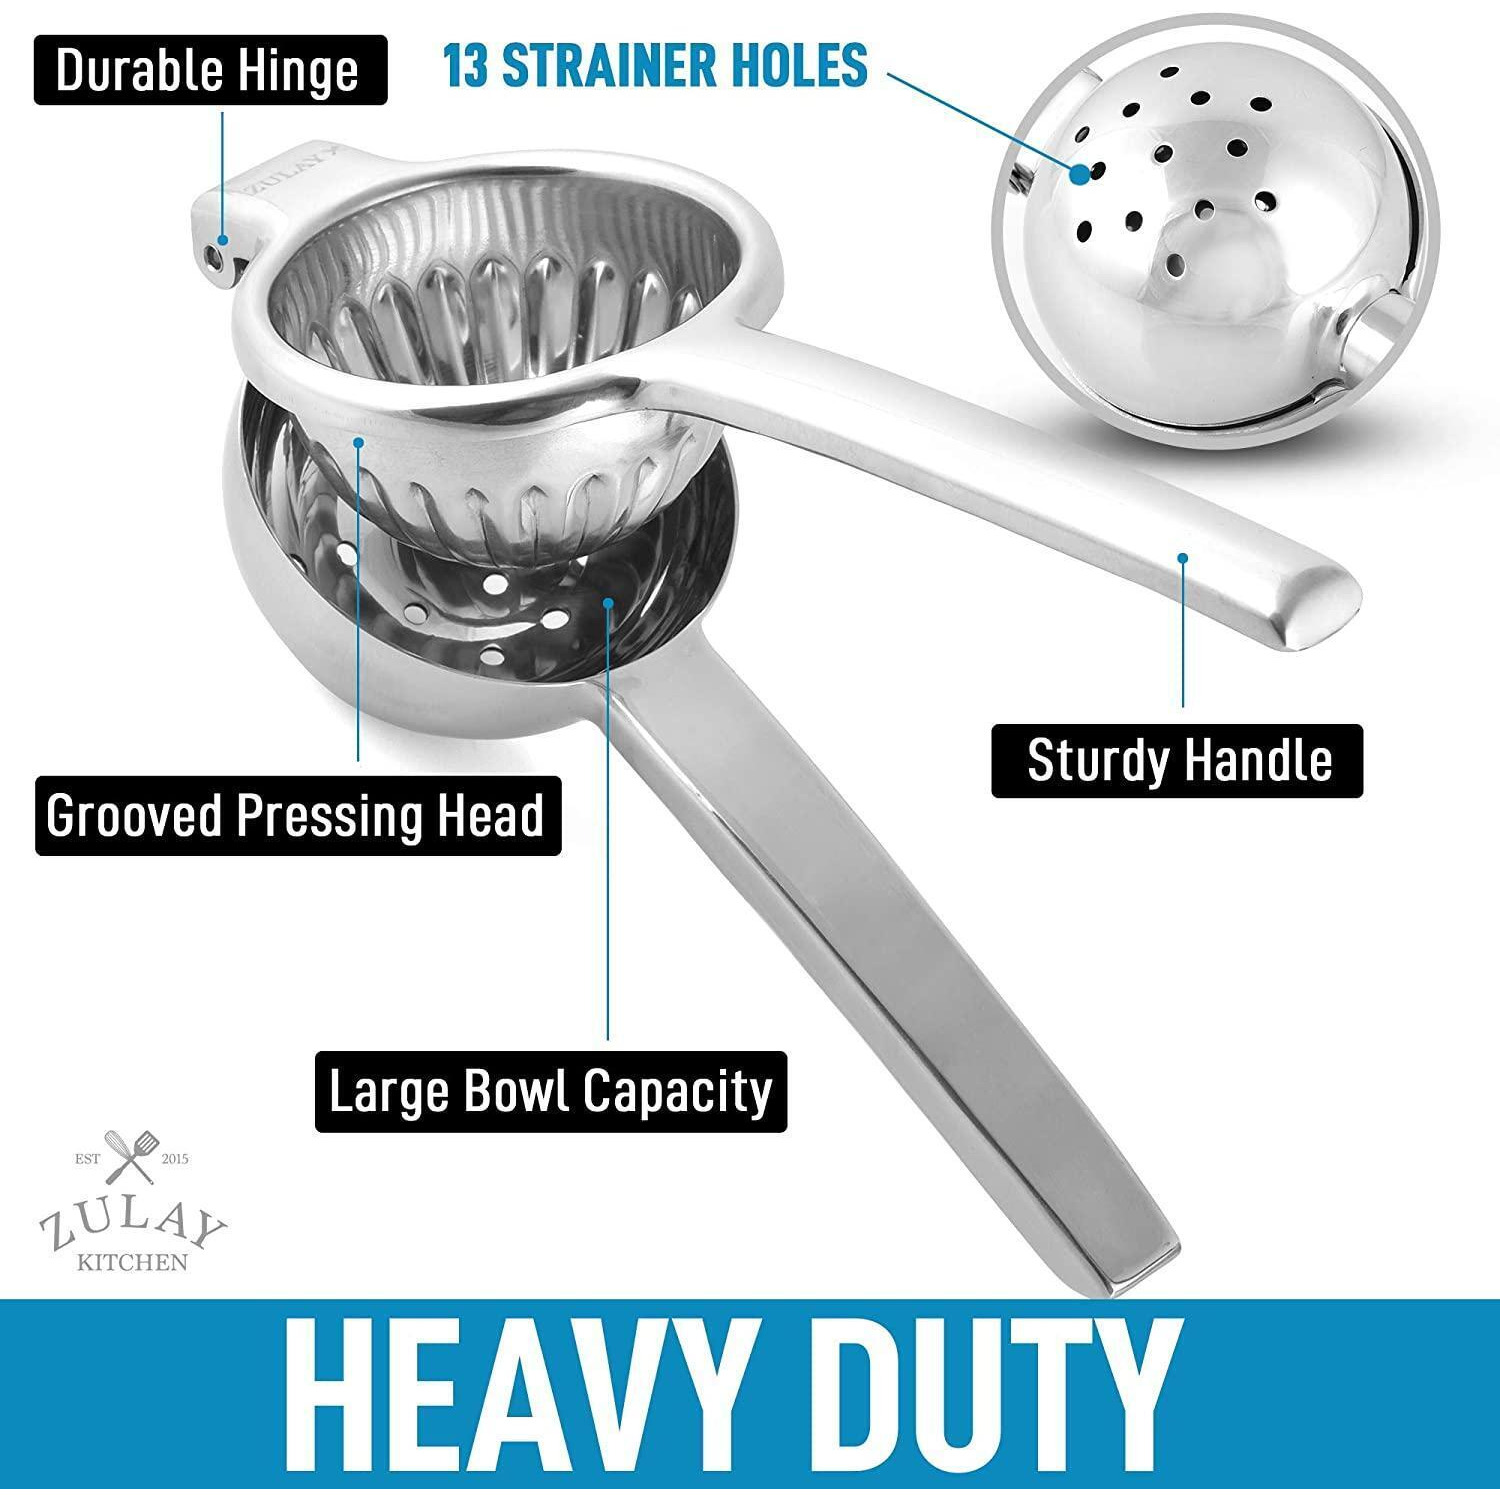 Zulay Kitchen Extra Large Heavy Duty Stainless Steel Lemon Squeezer for Small Oranges, Lemons, Limes alternate image